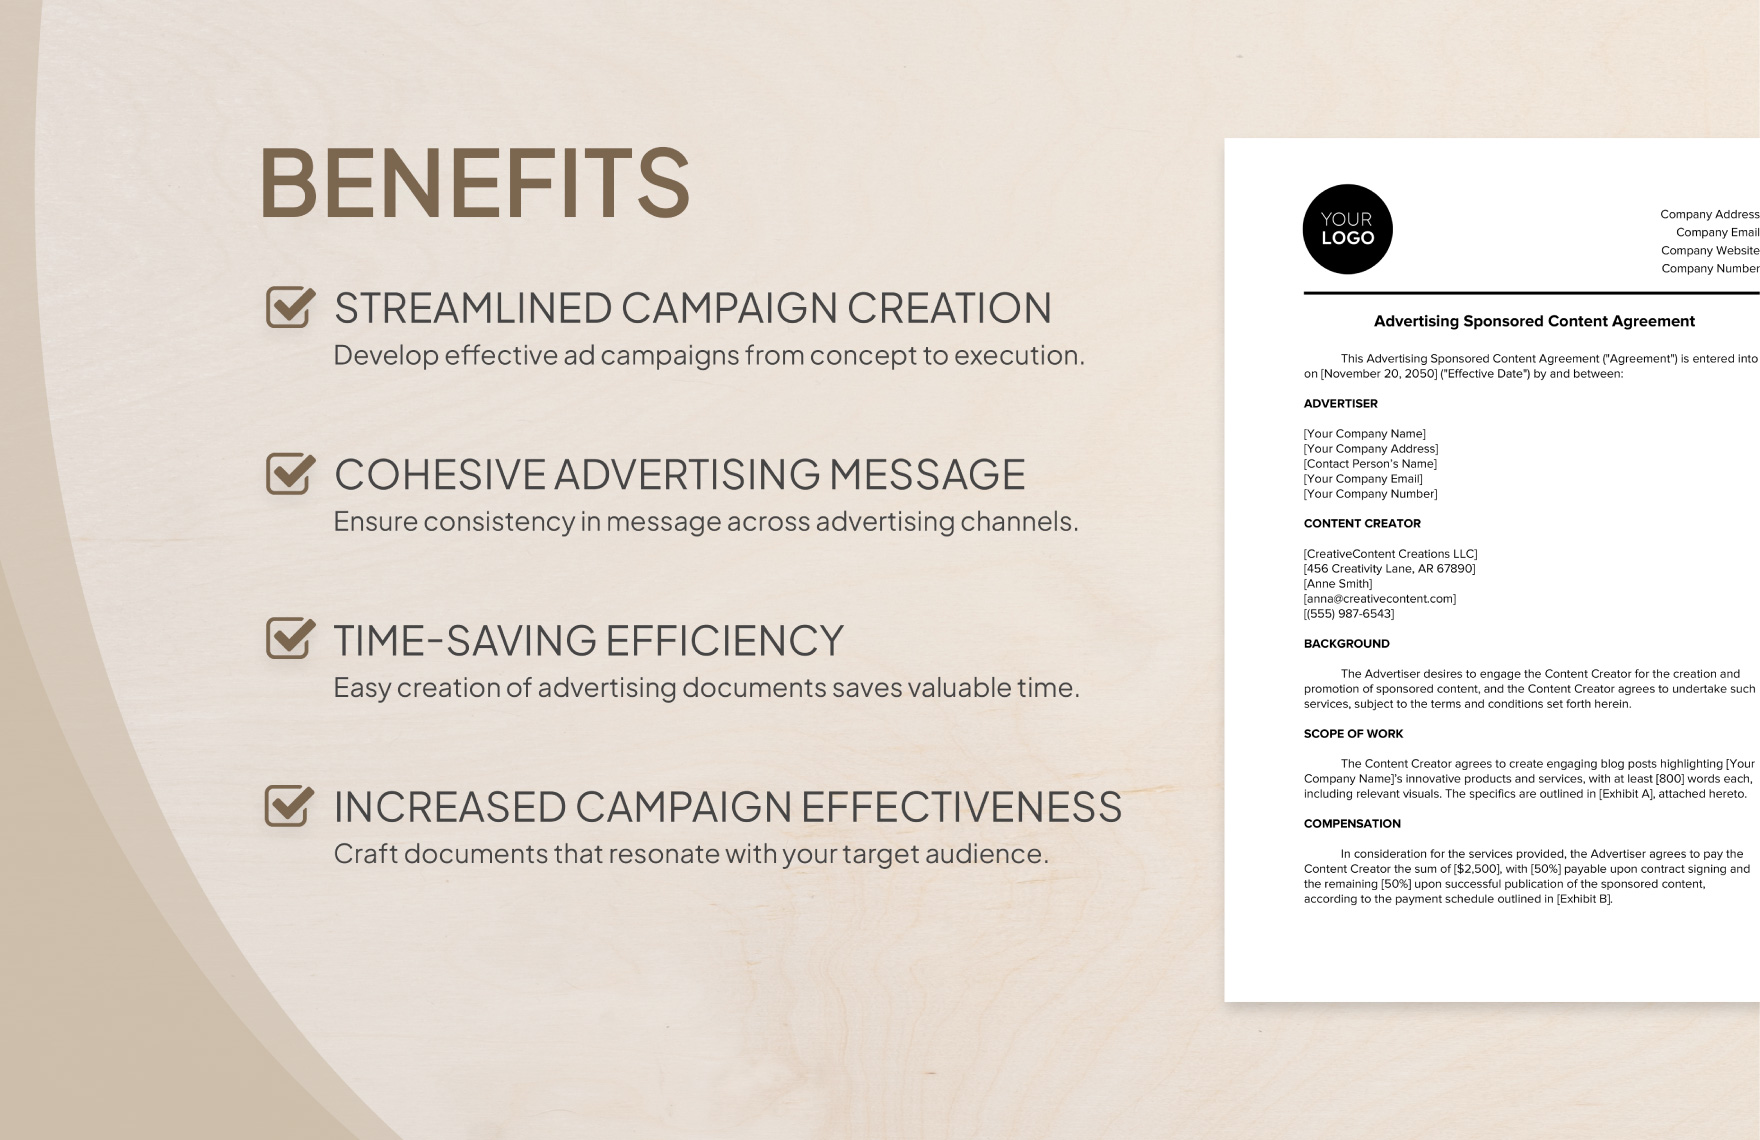 Advertising Sponsored Content Agreement Template